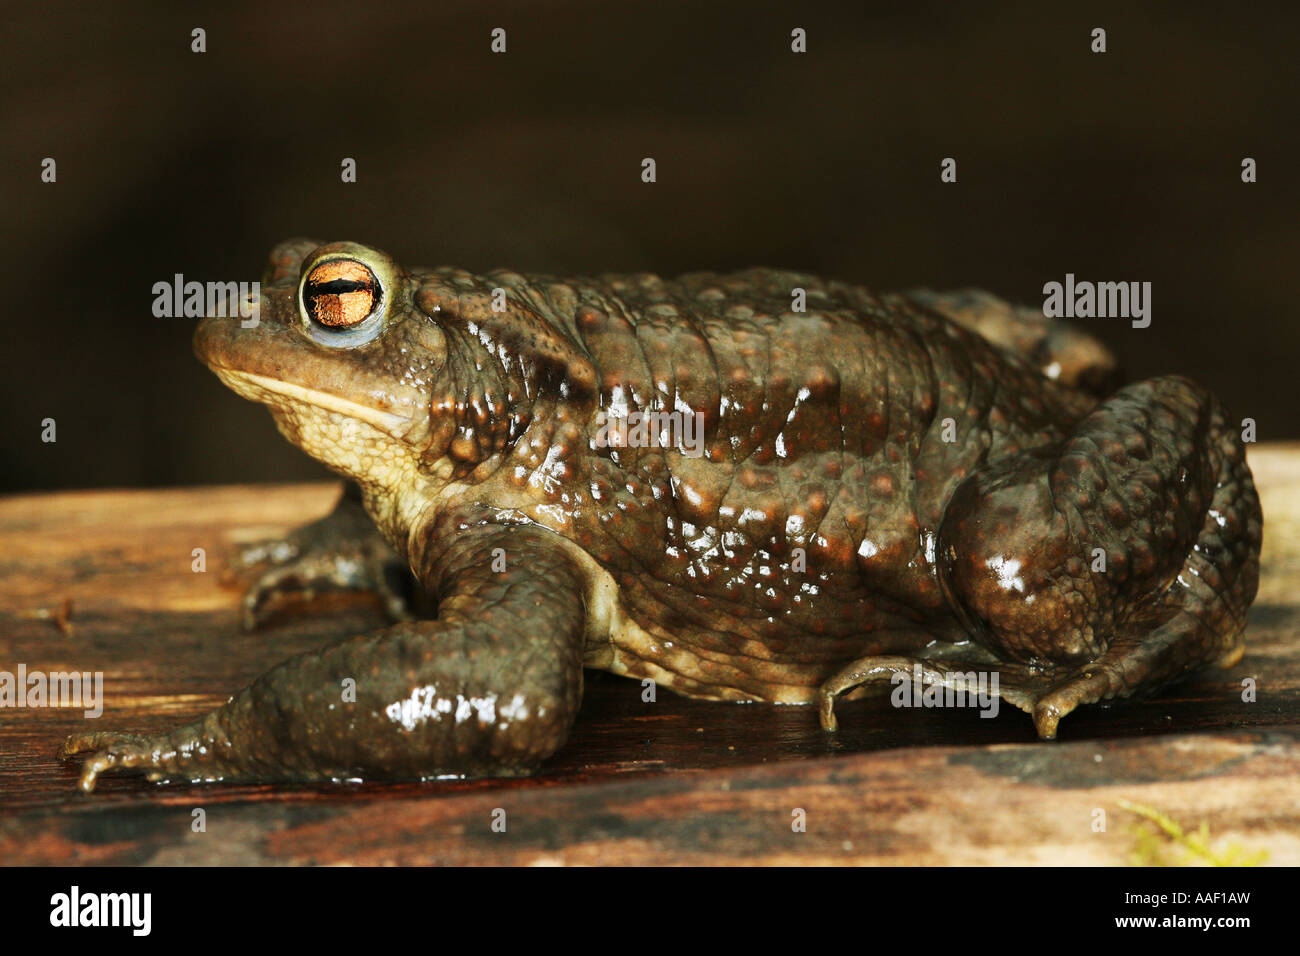 Common toad - lateral / Bufo bufo Stock Photo